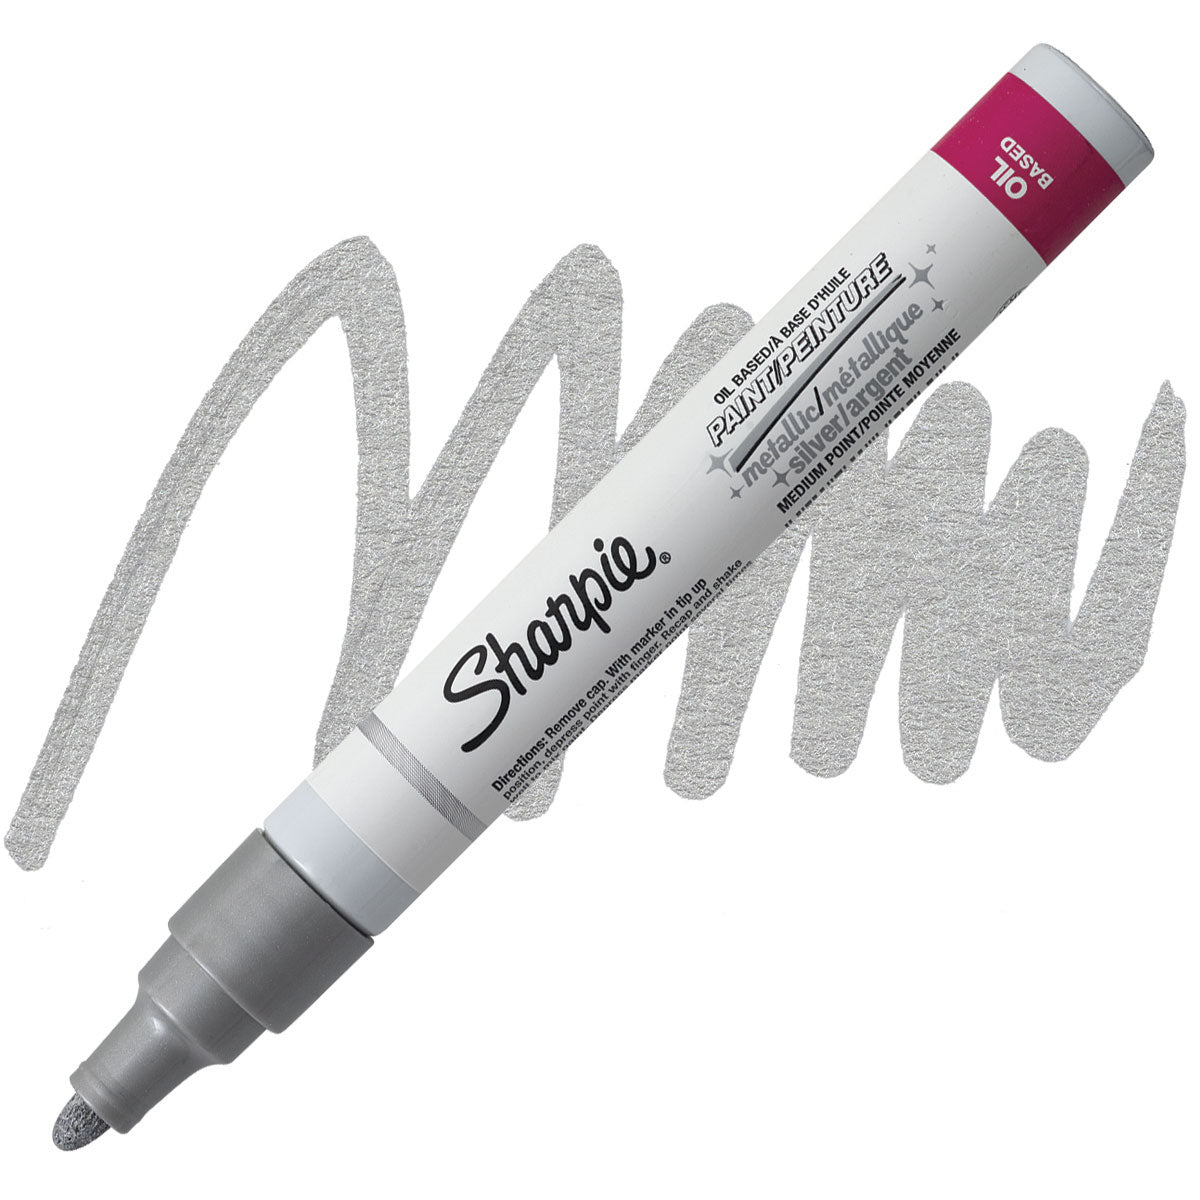  SHARPIE Oil-Based Fine Point Paint Markers, 12 Silver Markers  (37338) : Arts, Crafts & Sewing